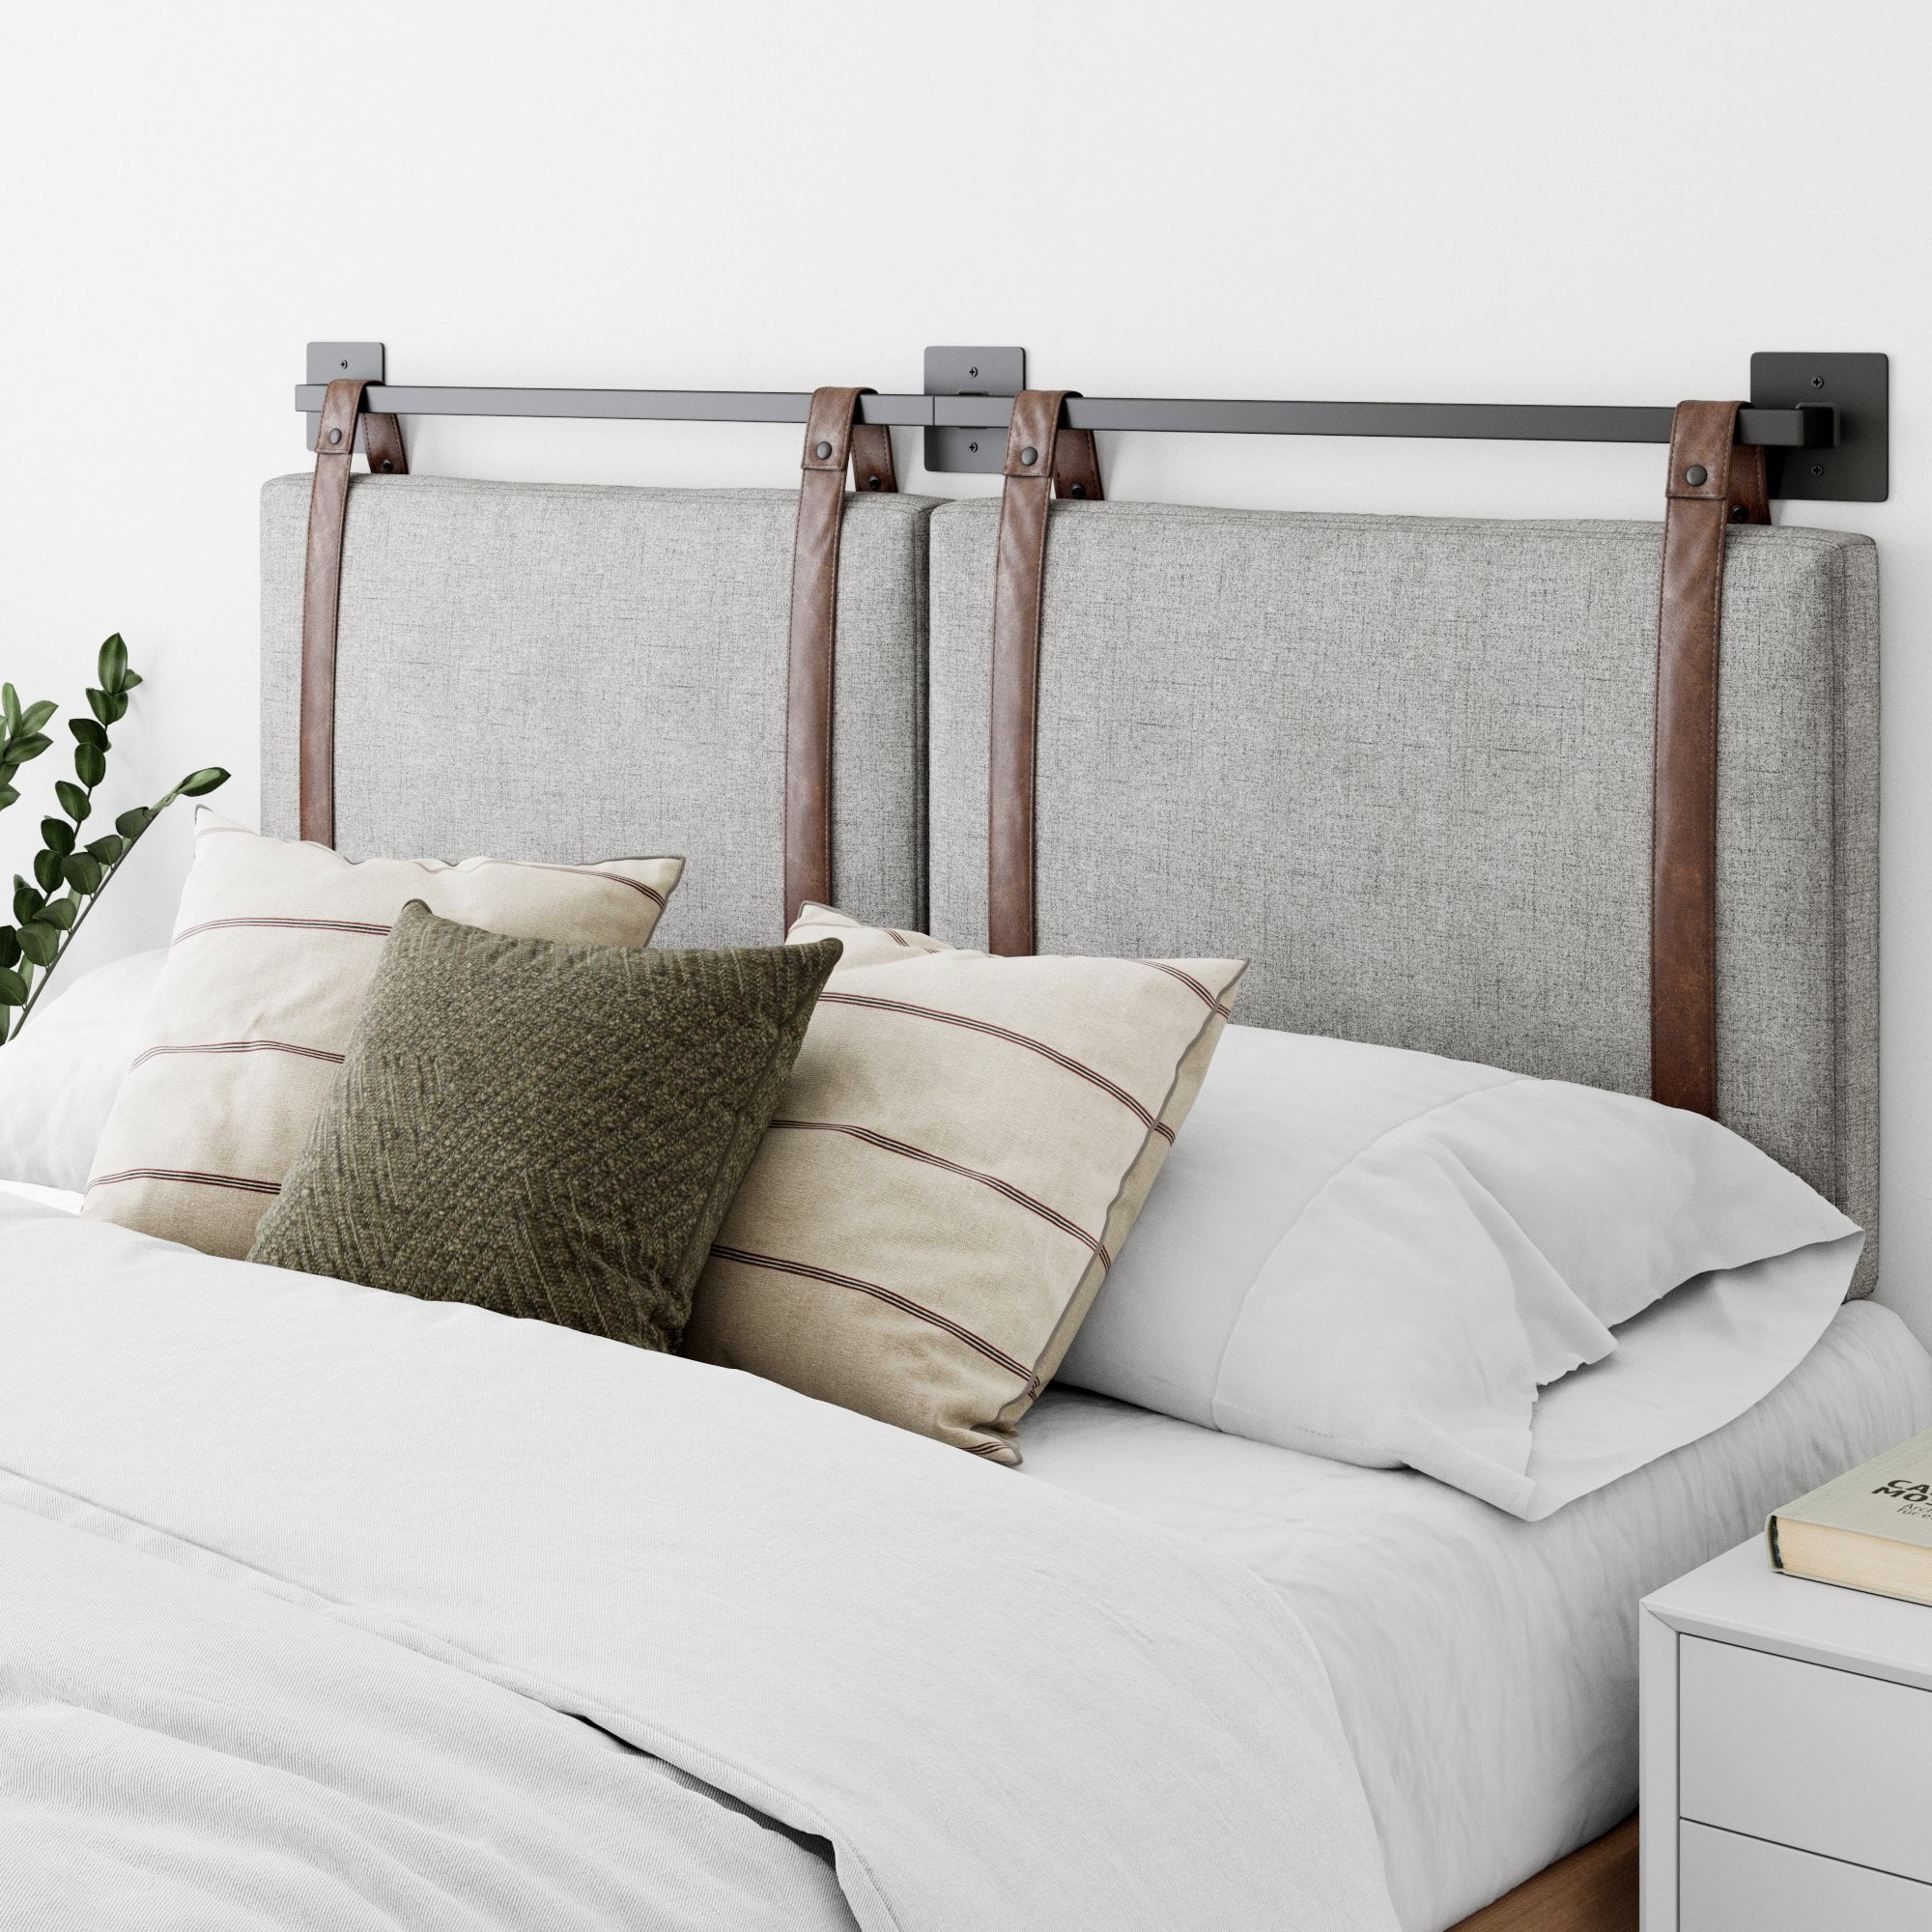 Nathan James Harlow Queen Full Wall, How To Bolt Headboard Wall